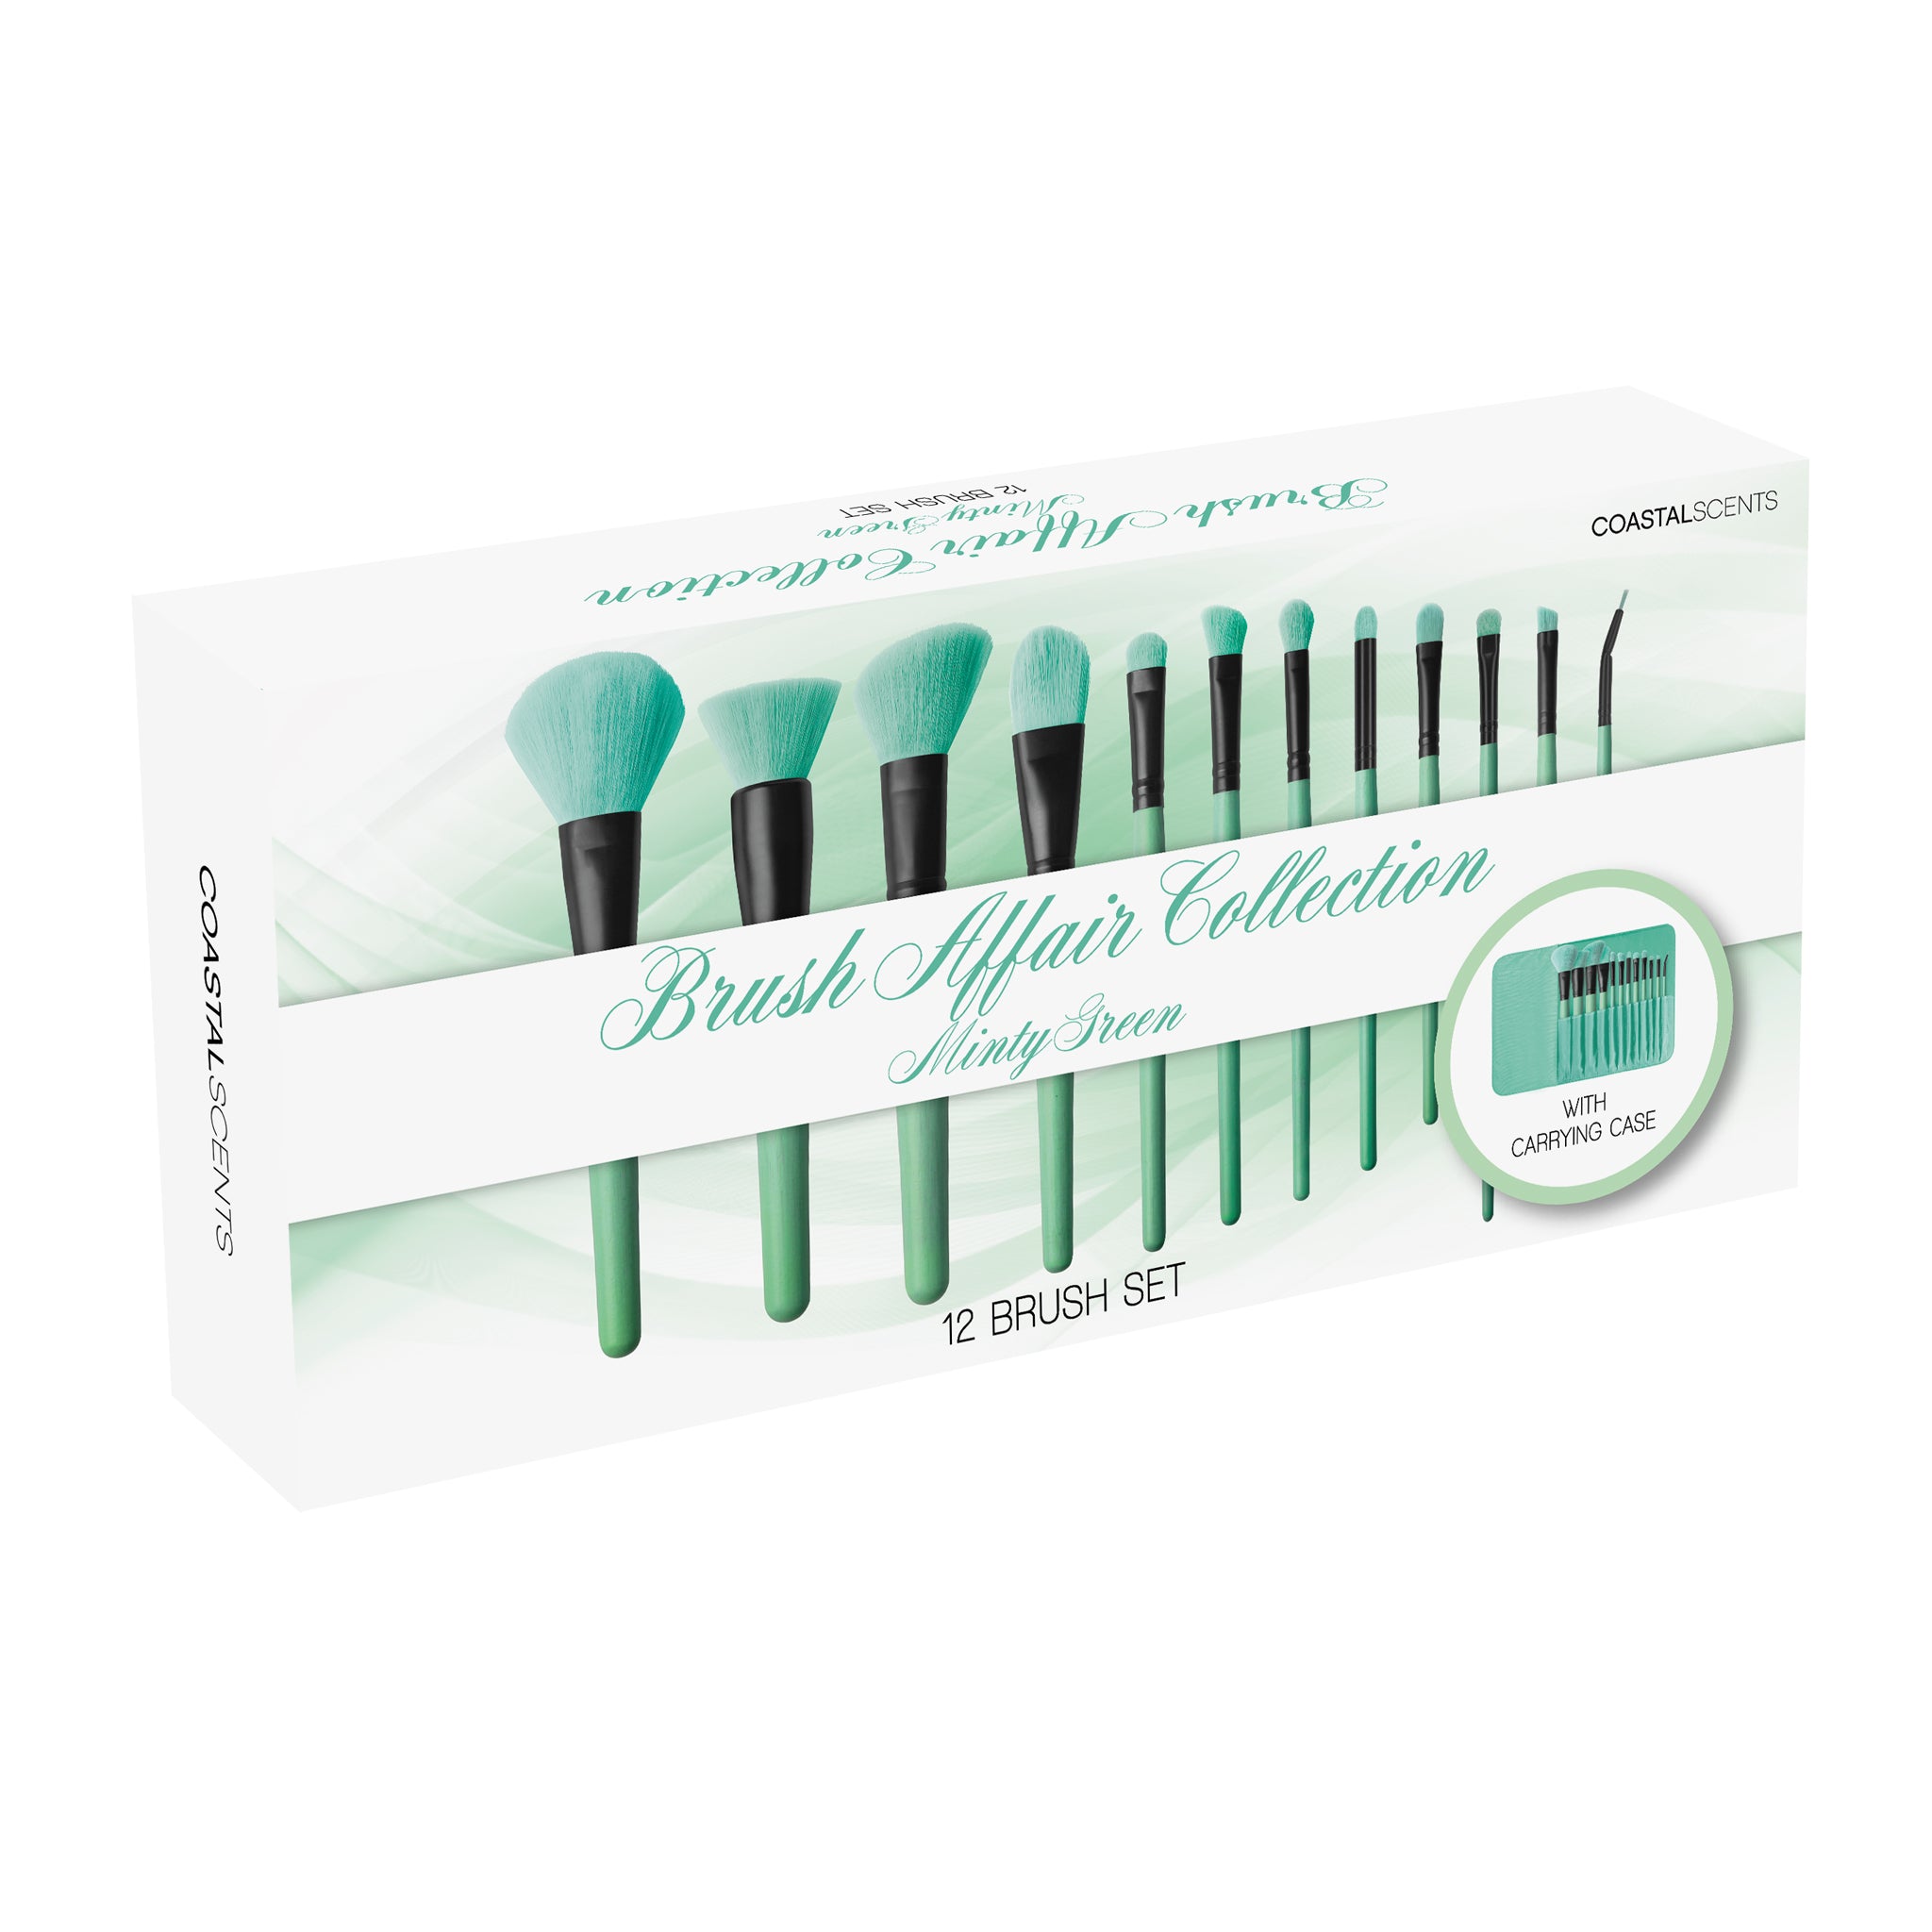 Brush Affair Collection 12 Piece Makeup Brush Set in Minty Green